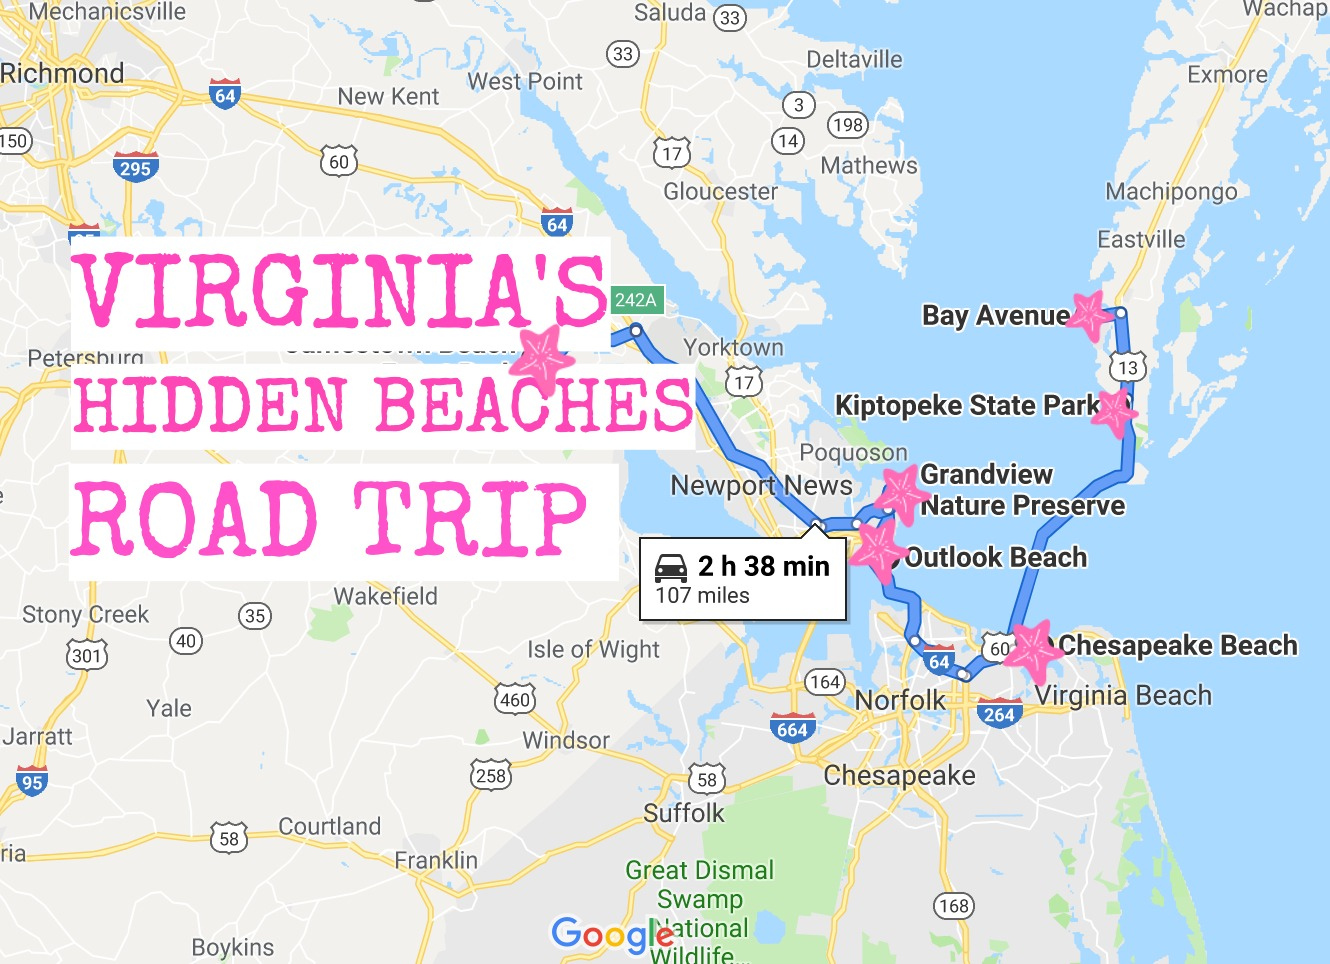 Visit Some Of The Best Beaches In Virginia On This Exciting Roadtrip